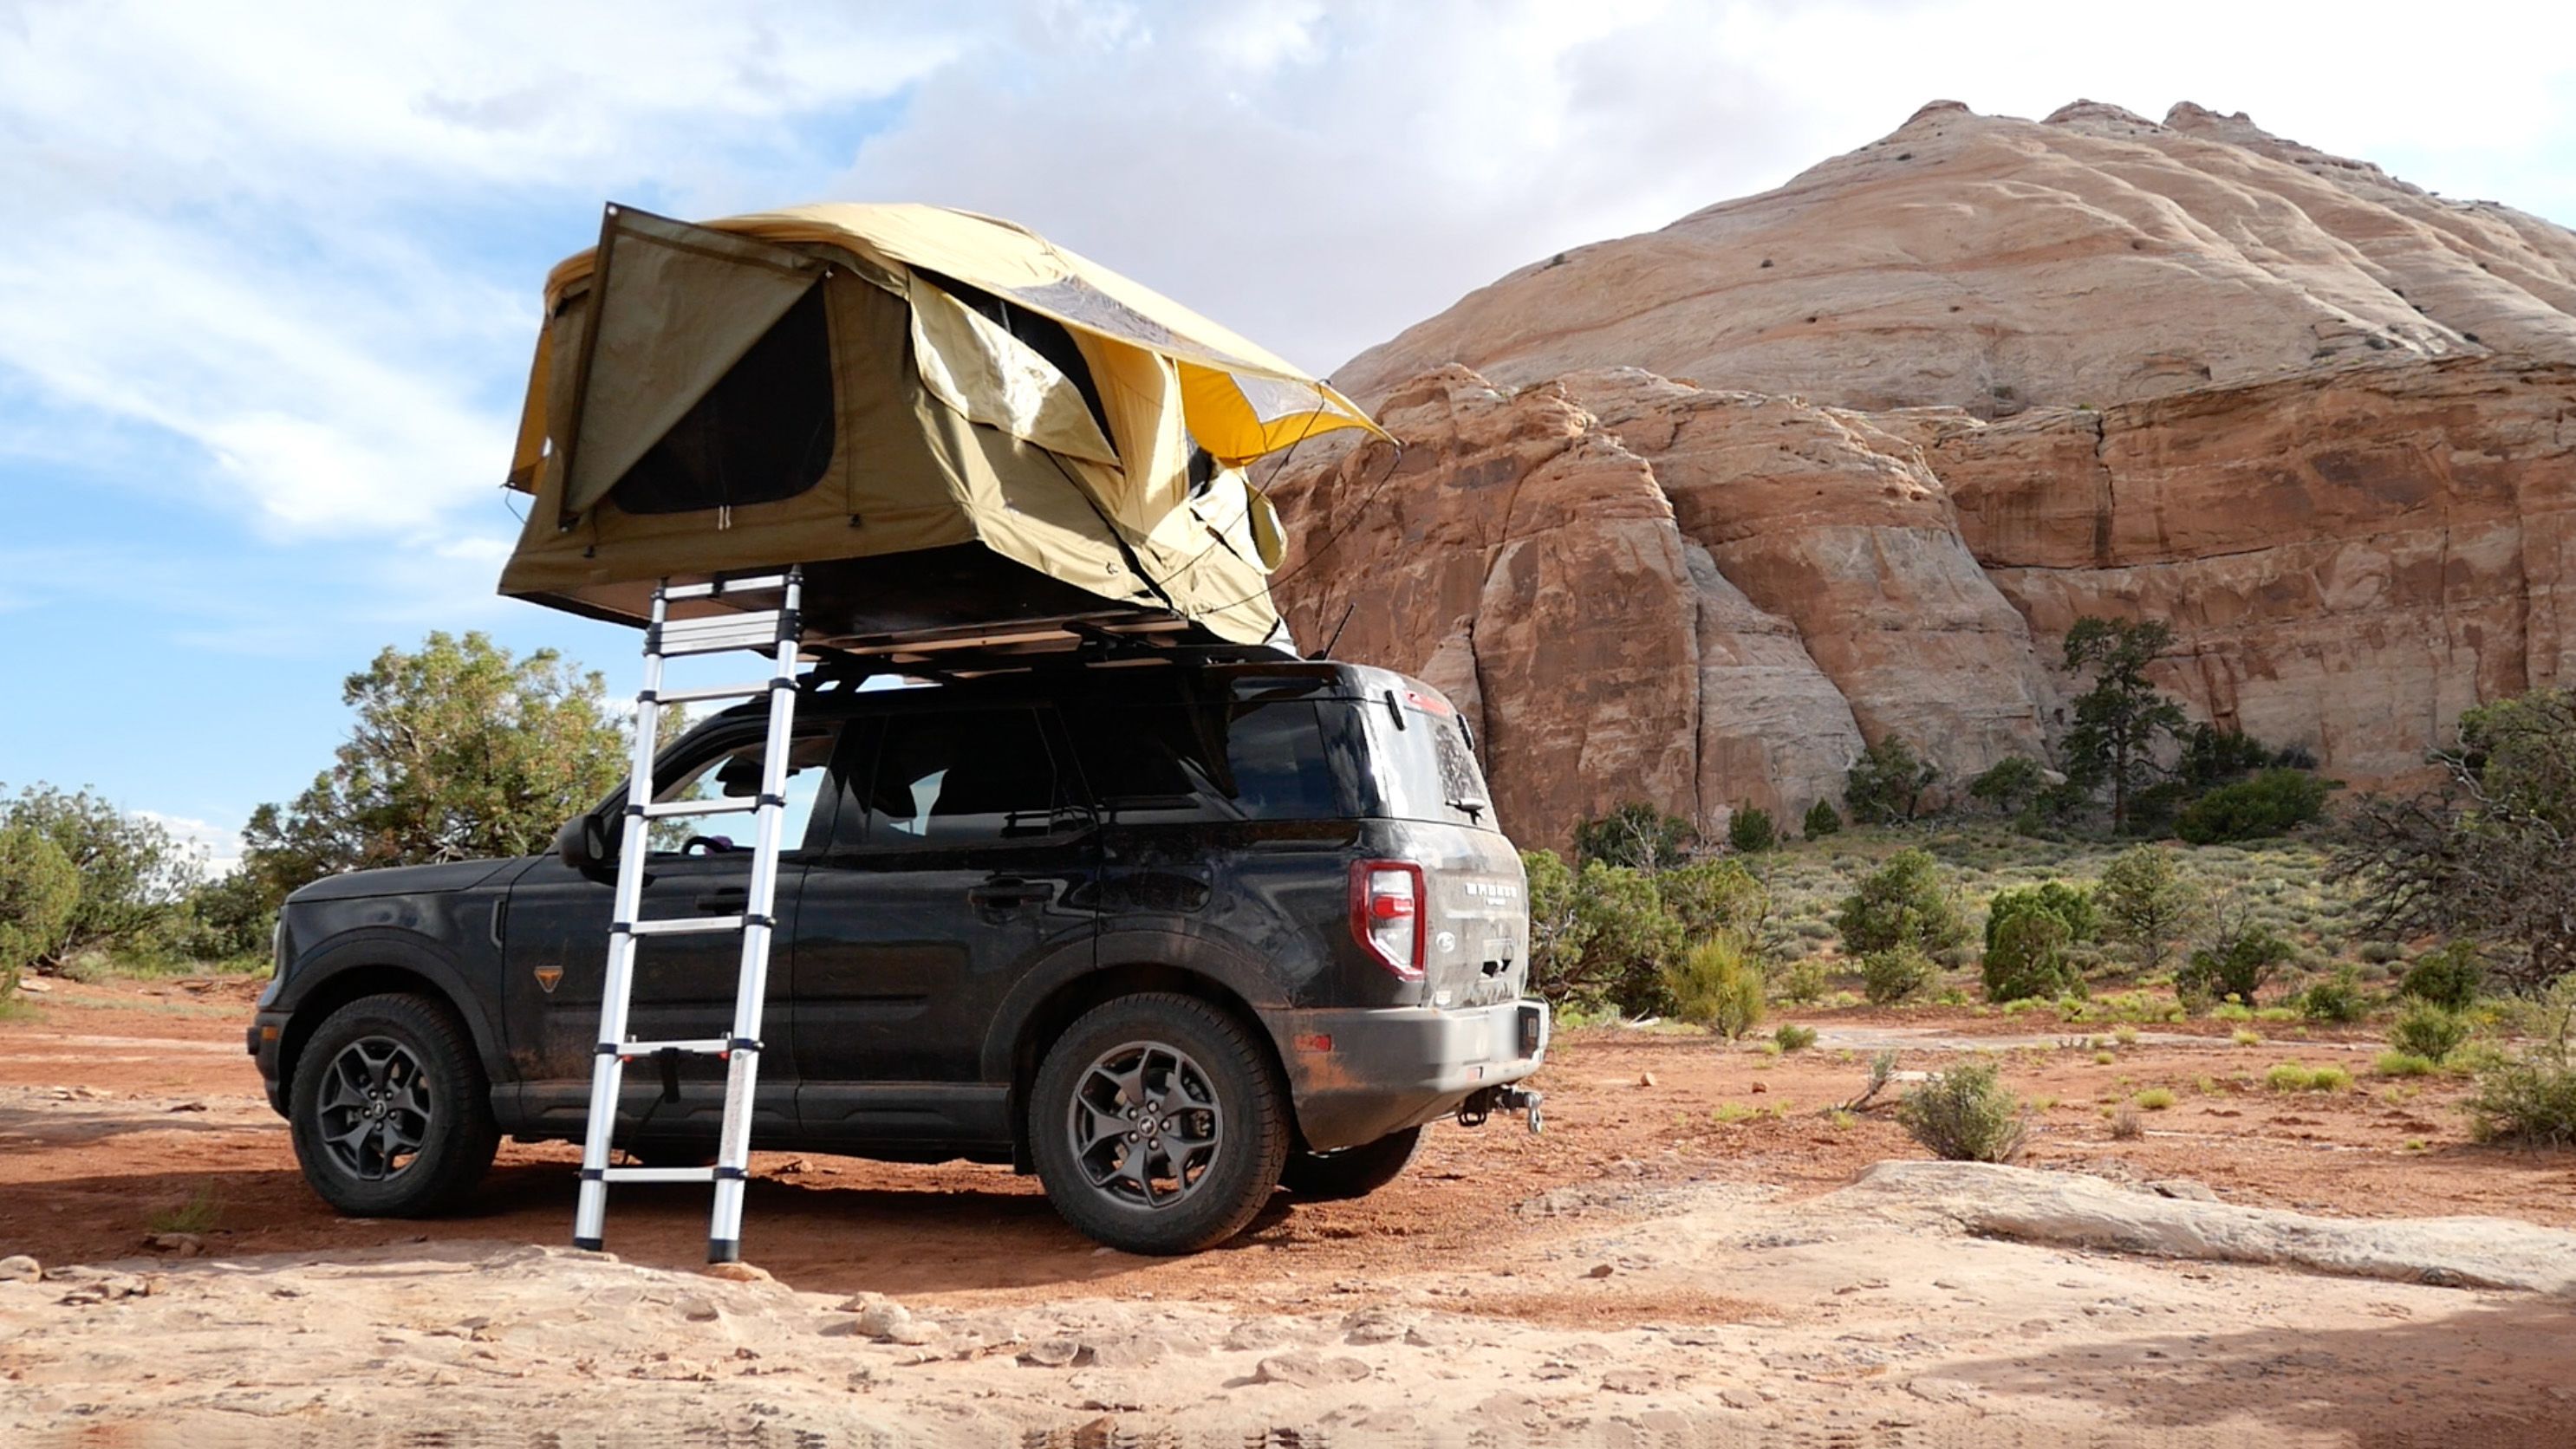 The Thule Approach rooftop tent | Underscored